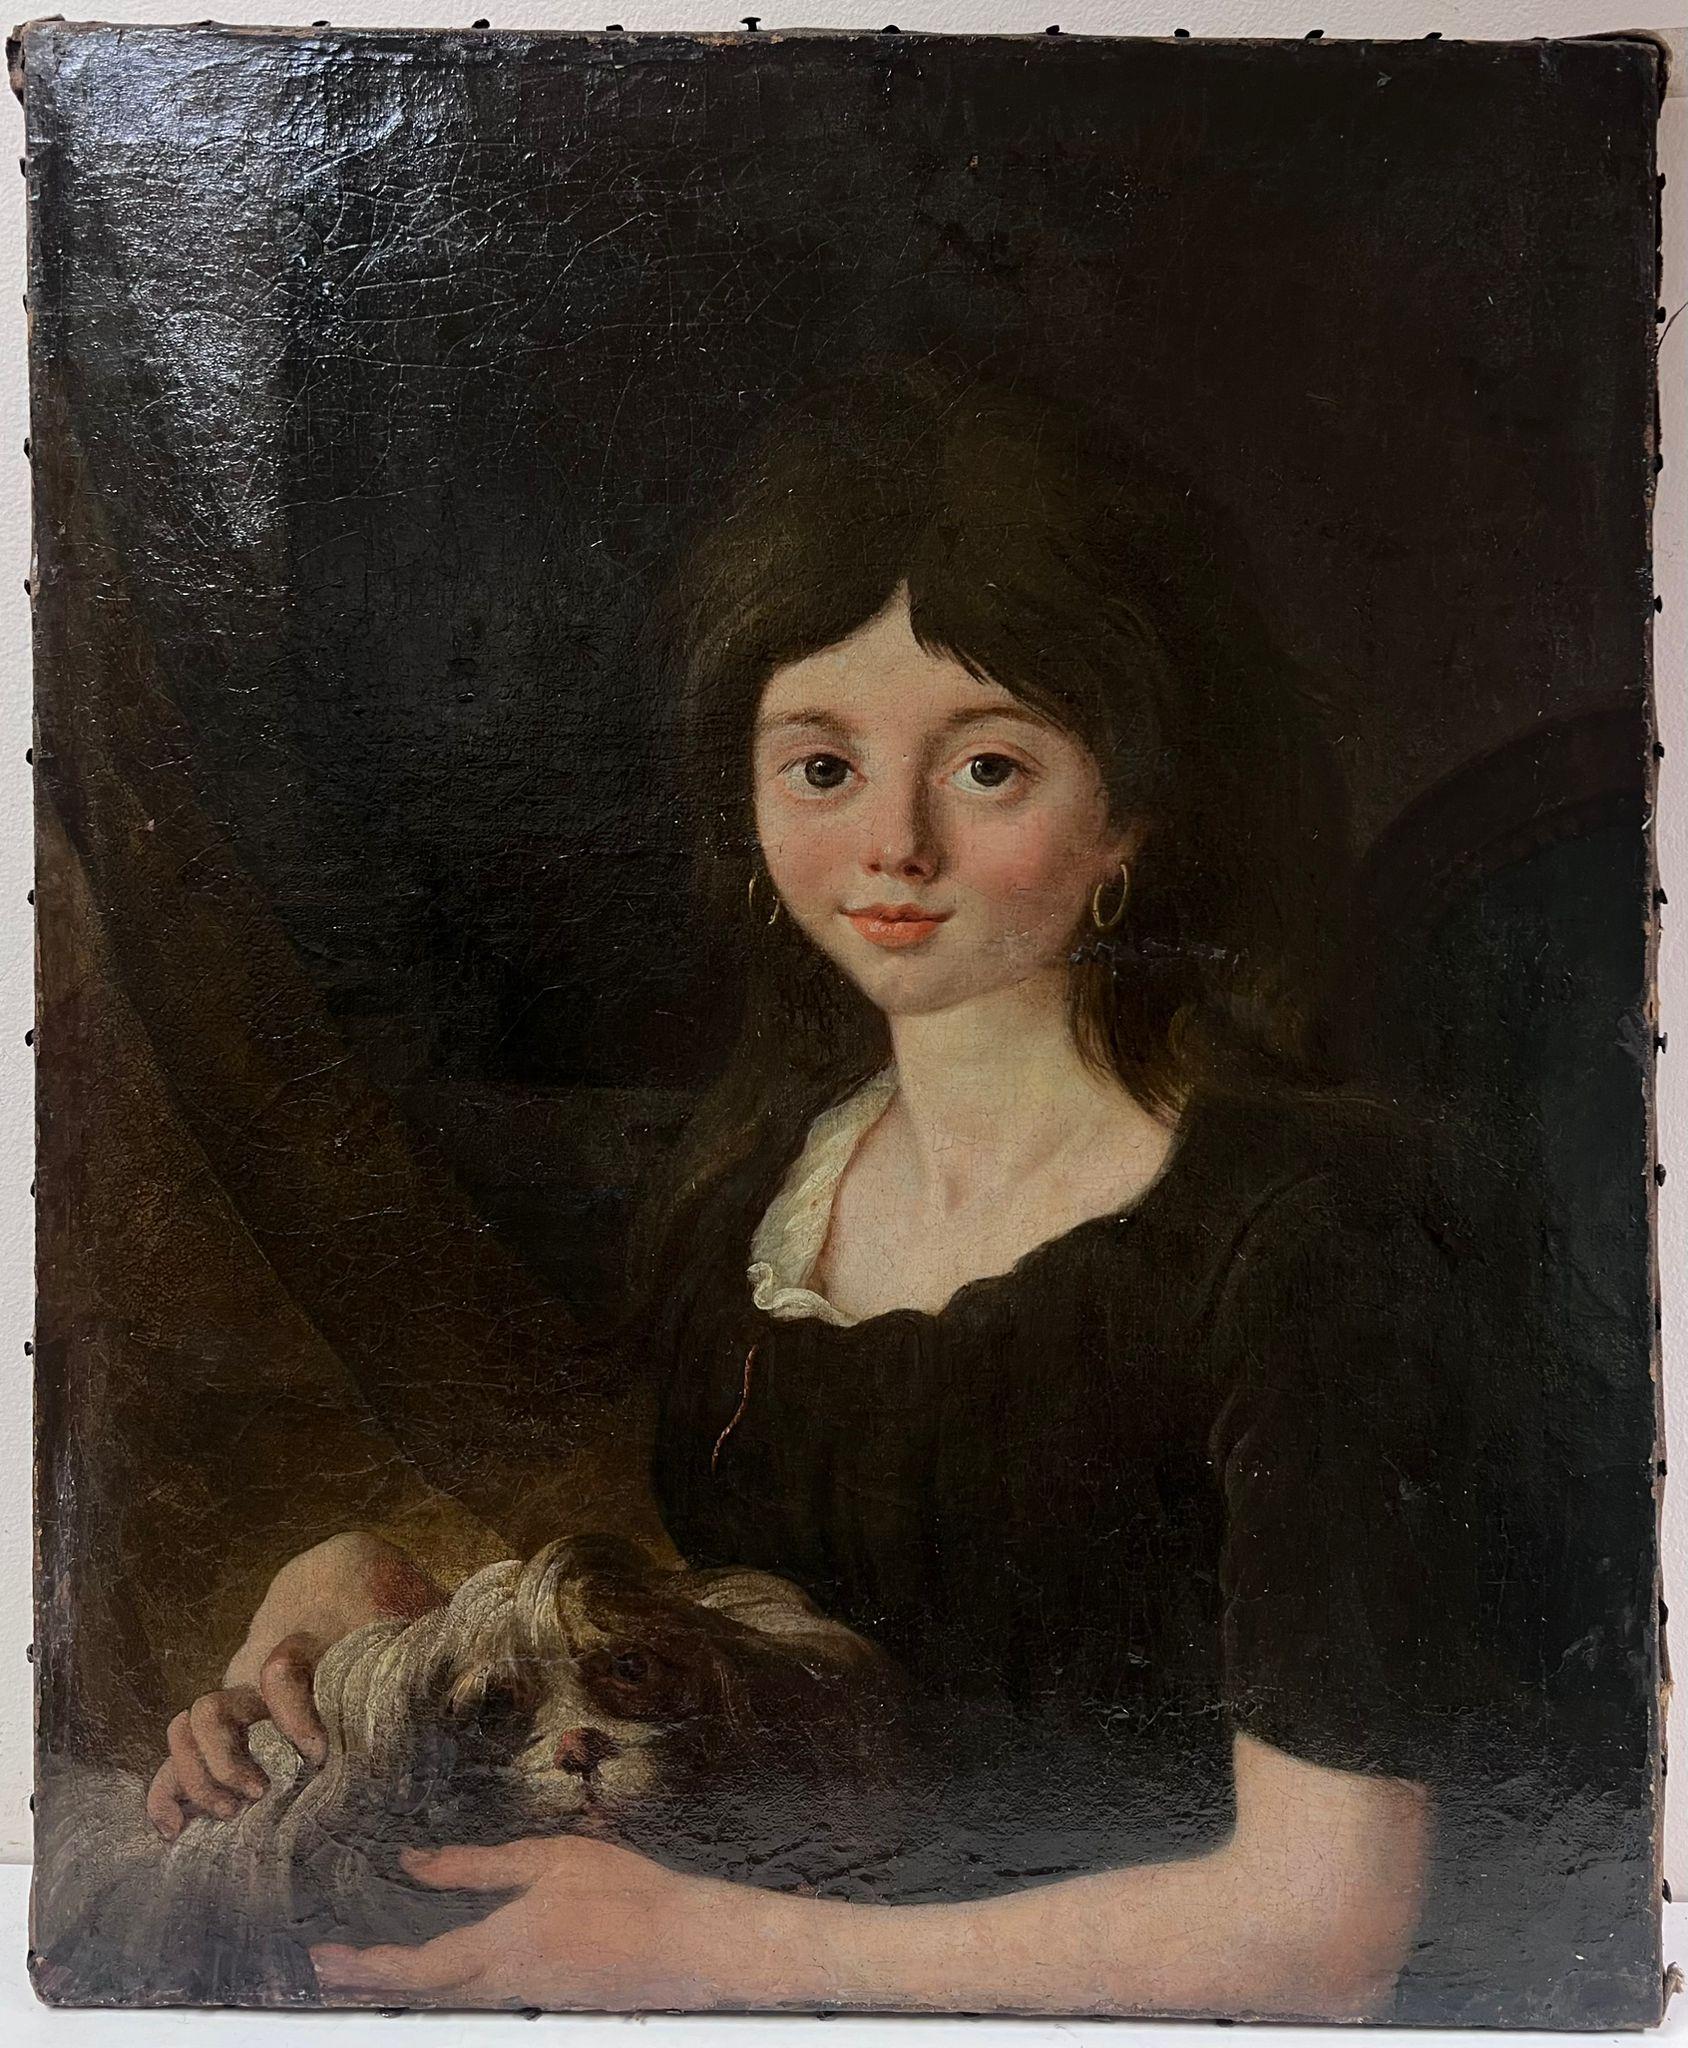 Portrait of a Young Girl with her Dog
French School, circa 1800 period
oil on canvas, unframed
canvas : 23.5 x 19 inches
provenance: private collection, France
condition: the painting has seen former restoration but is in good and sound condition.